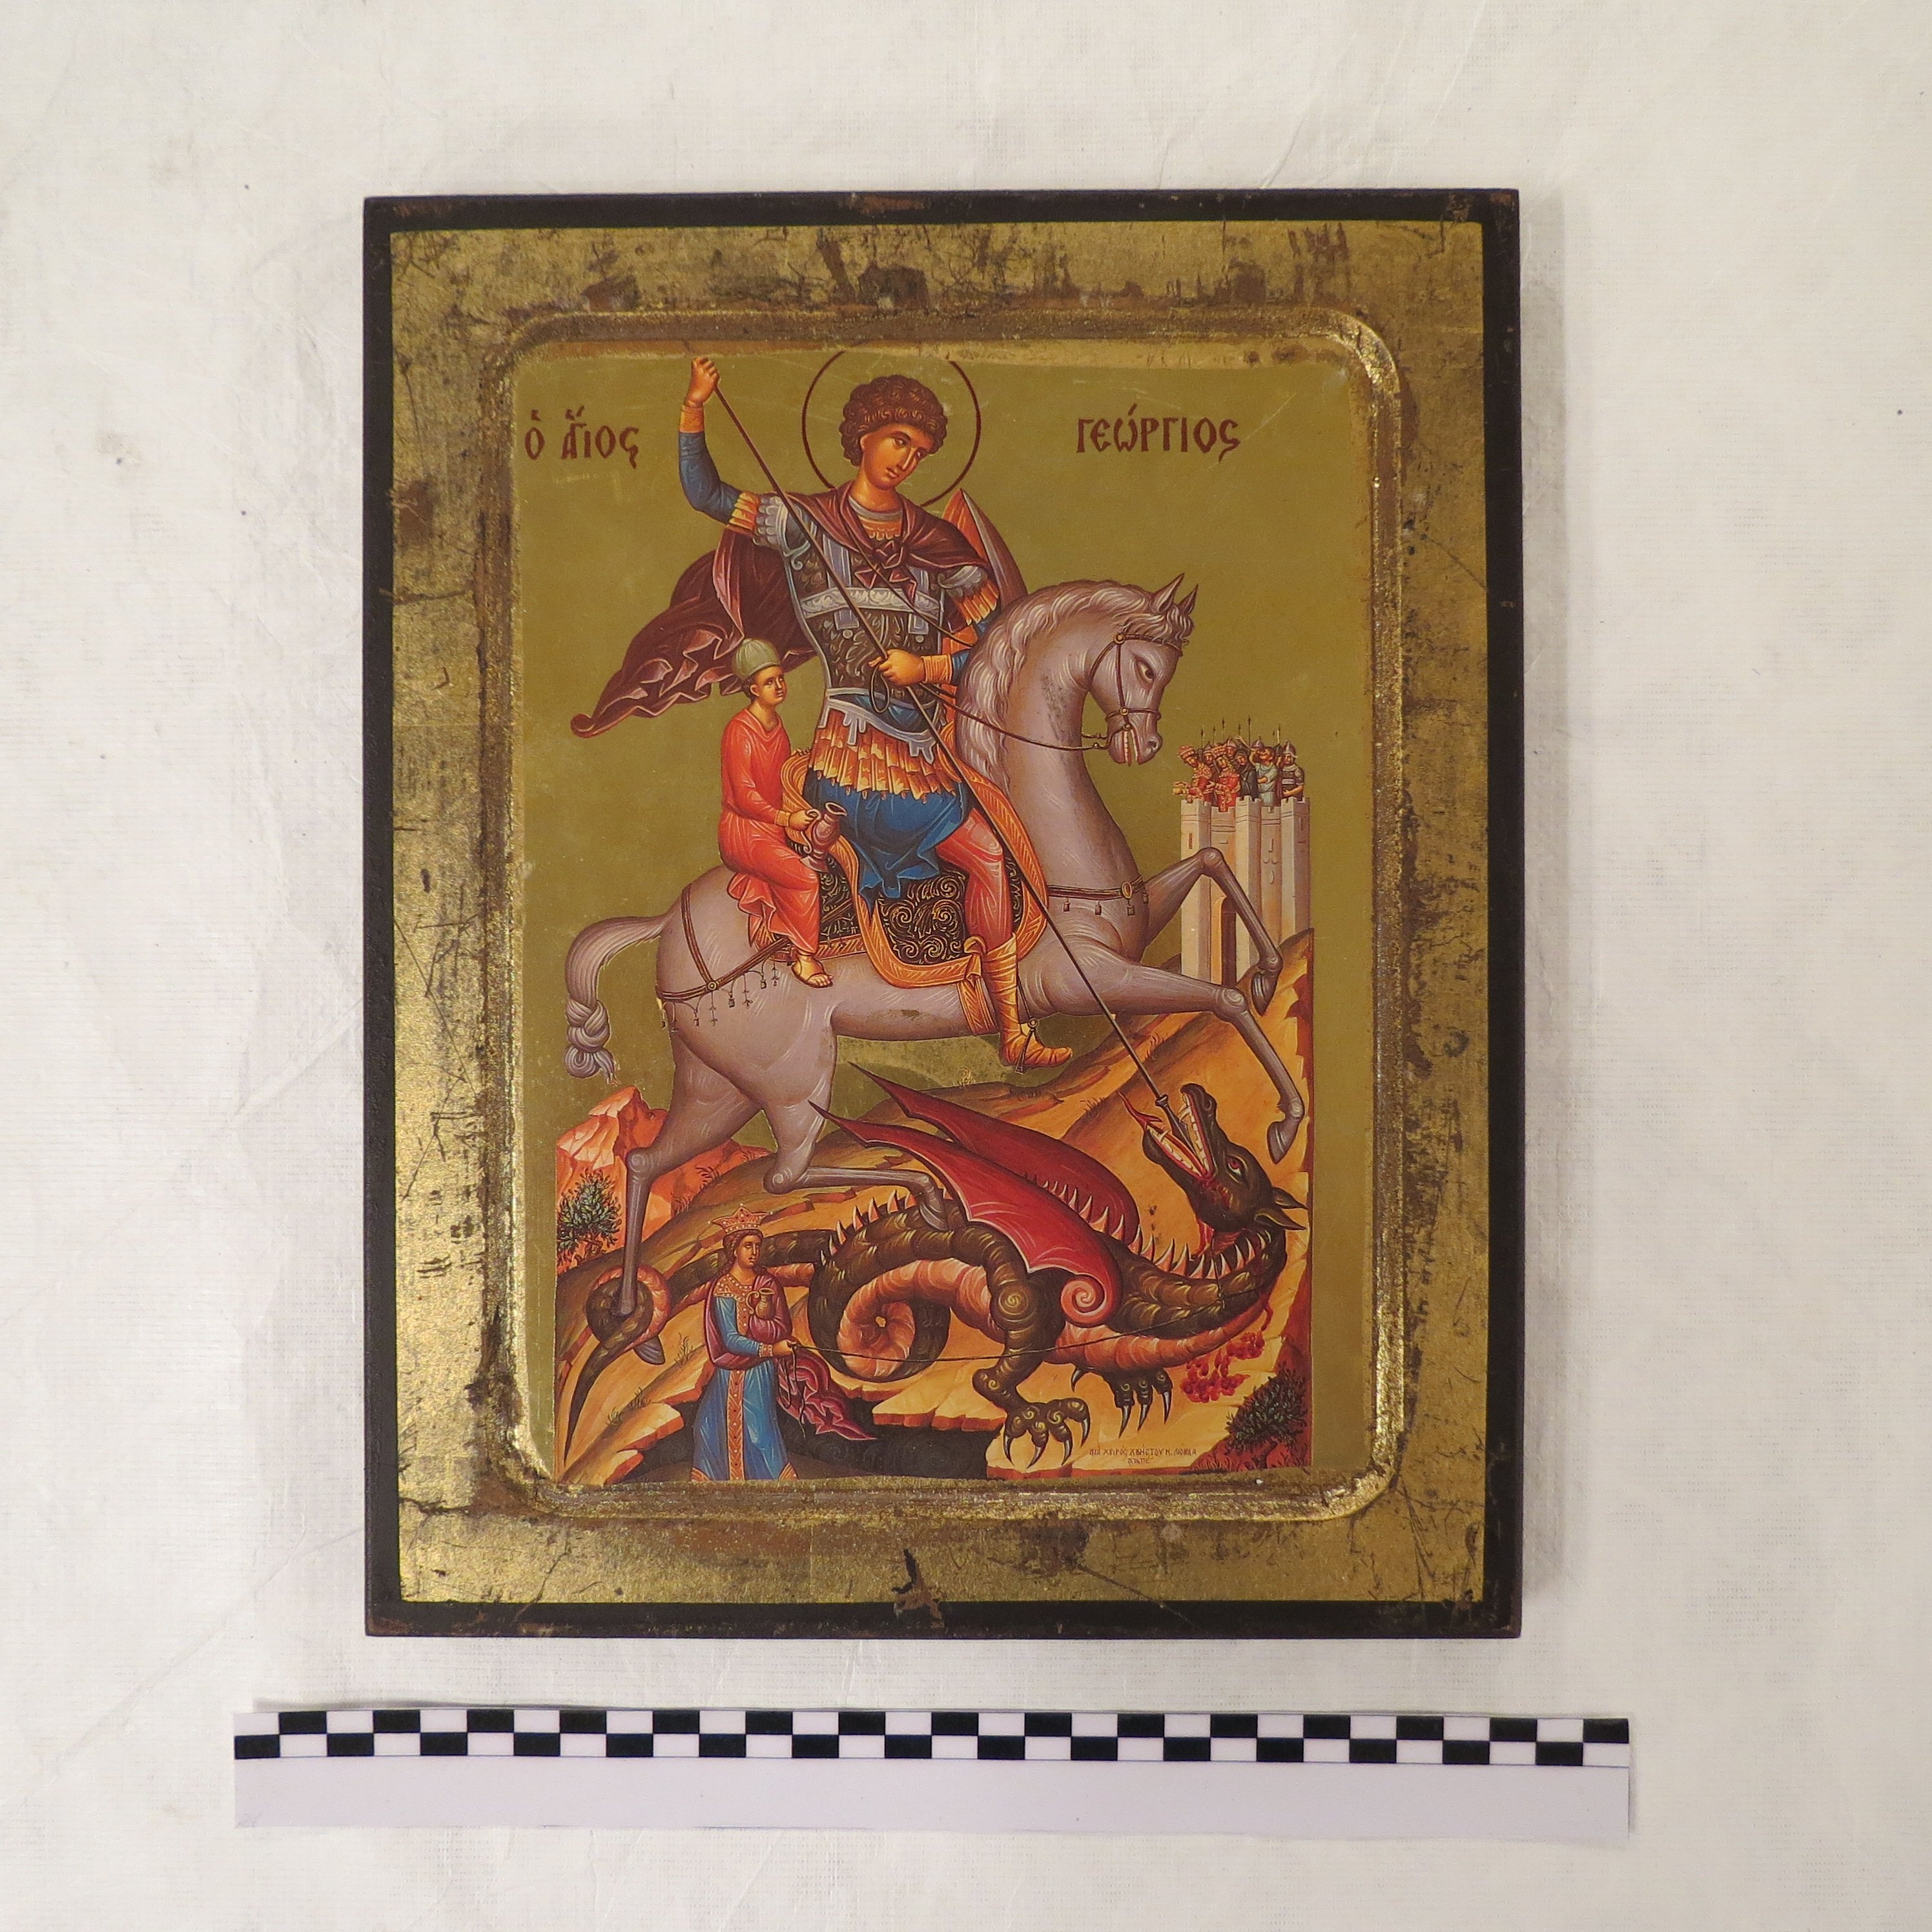 An icon stolen from the Gökçeada churches. (Courtesy of Turkey's Ministry of Culture and Tourism)